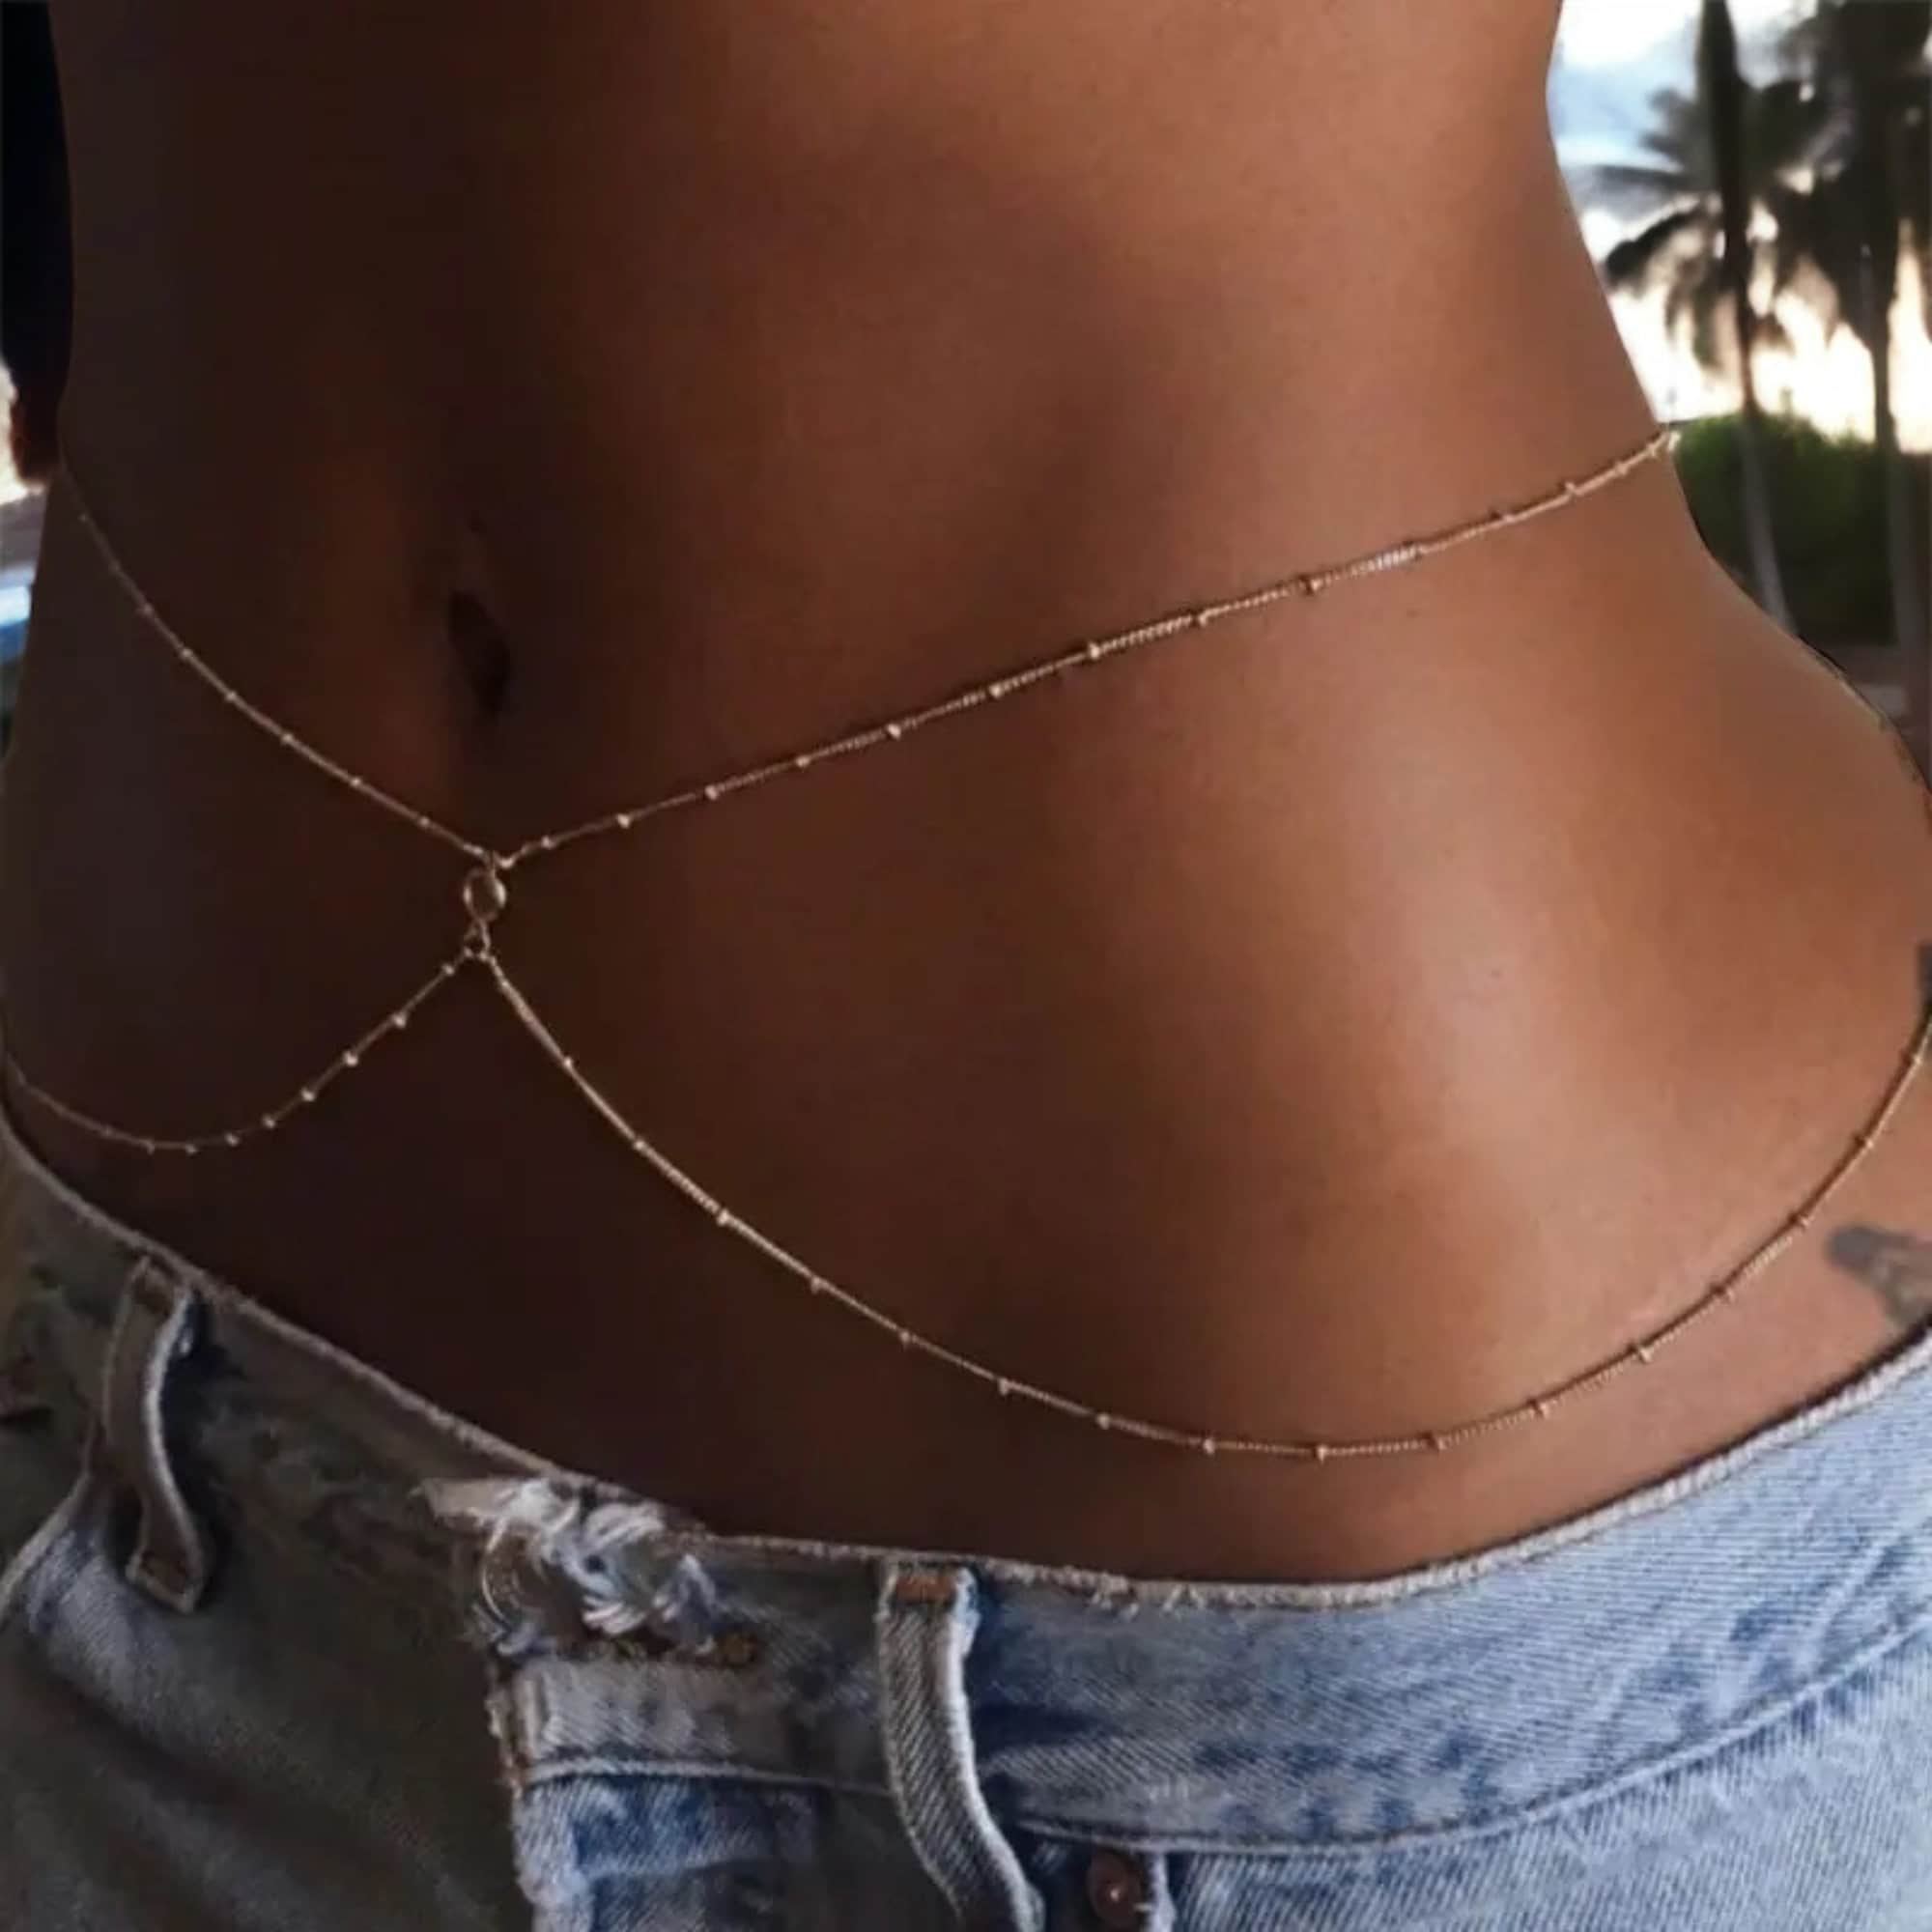 Crystal Waist Beads Wholesale Waistbeads With Crystals Belly Chain, Tummy  Chain FREE SHIPPING 